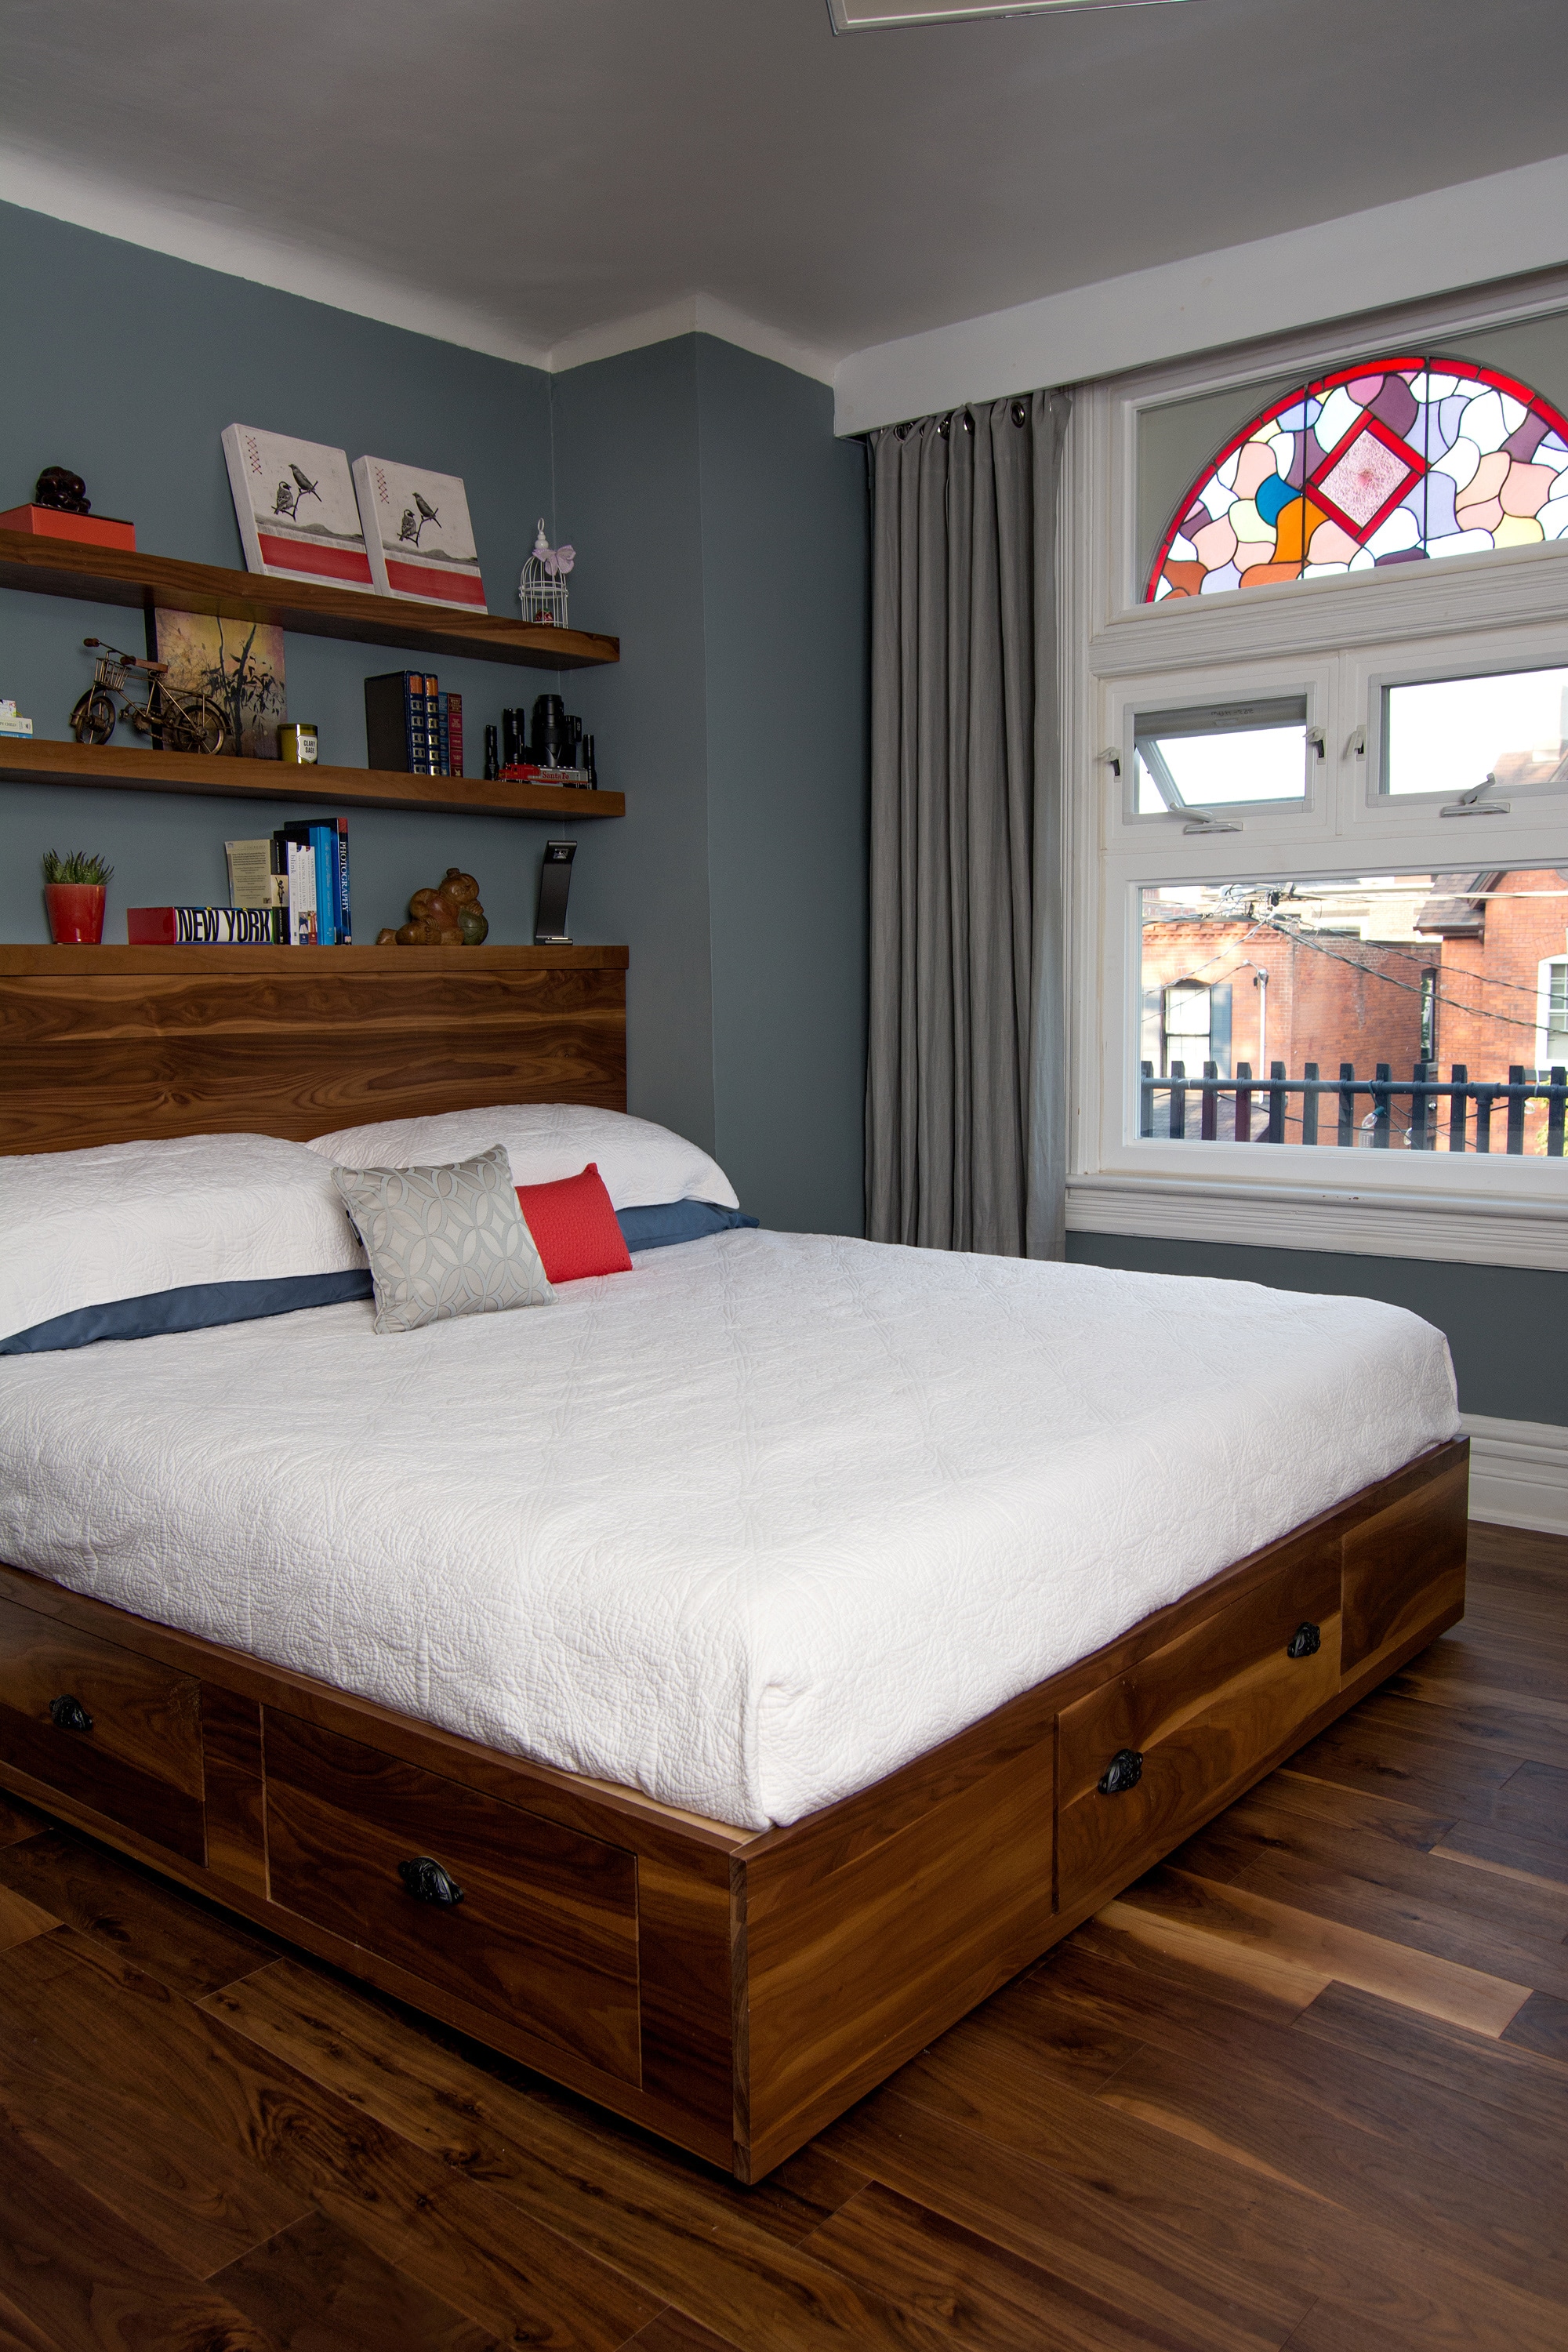 The stained glass window in my clients bedroom was our inspiration for the accent colours and accessories.